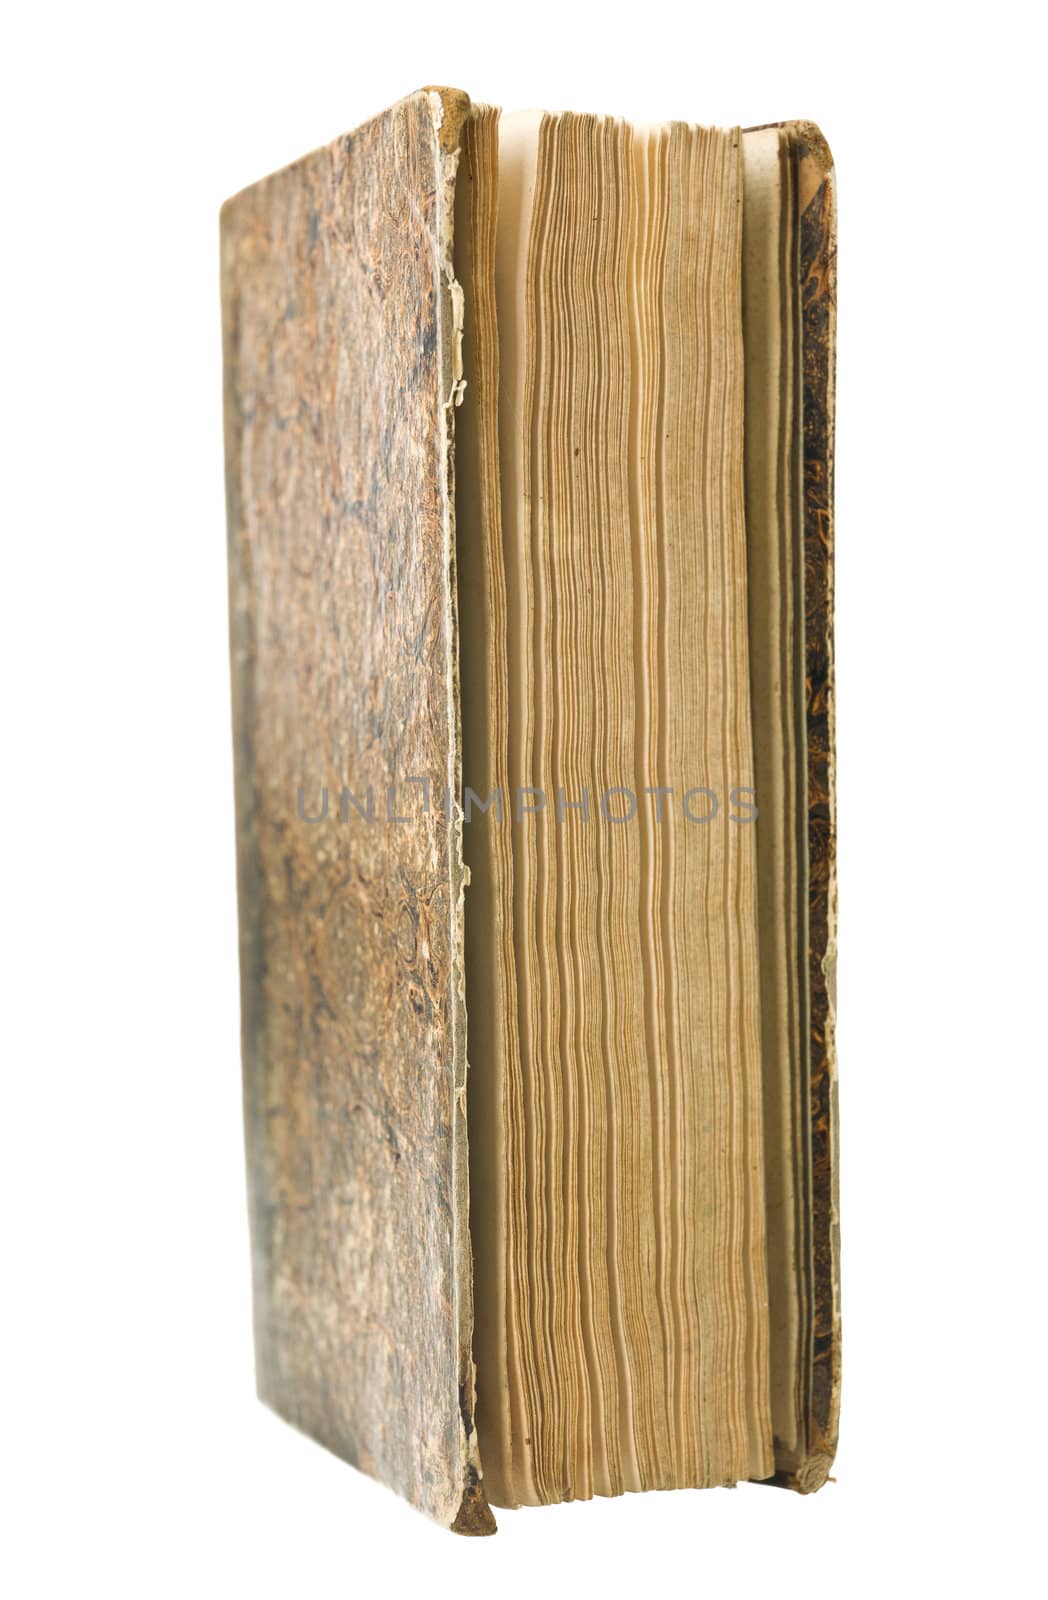 Antique Book isolated on white background